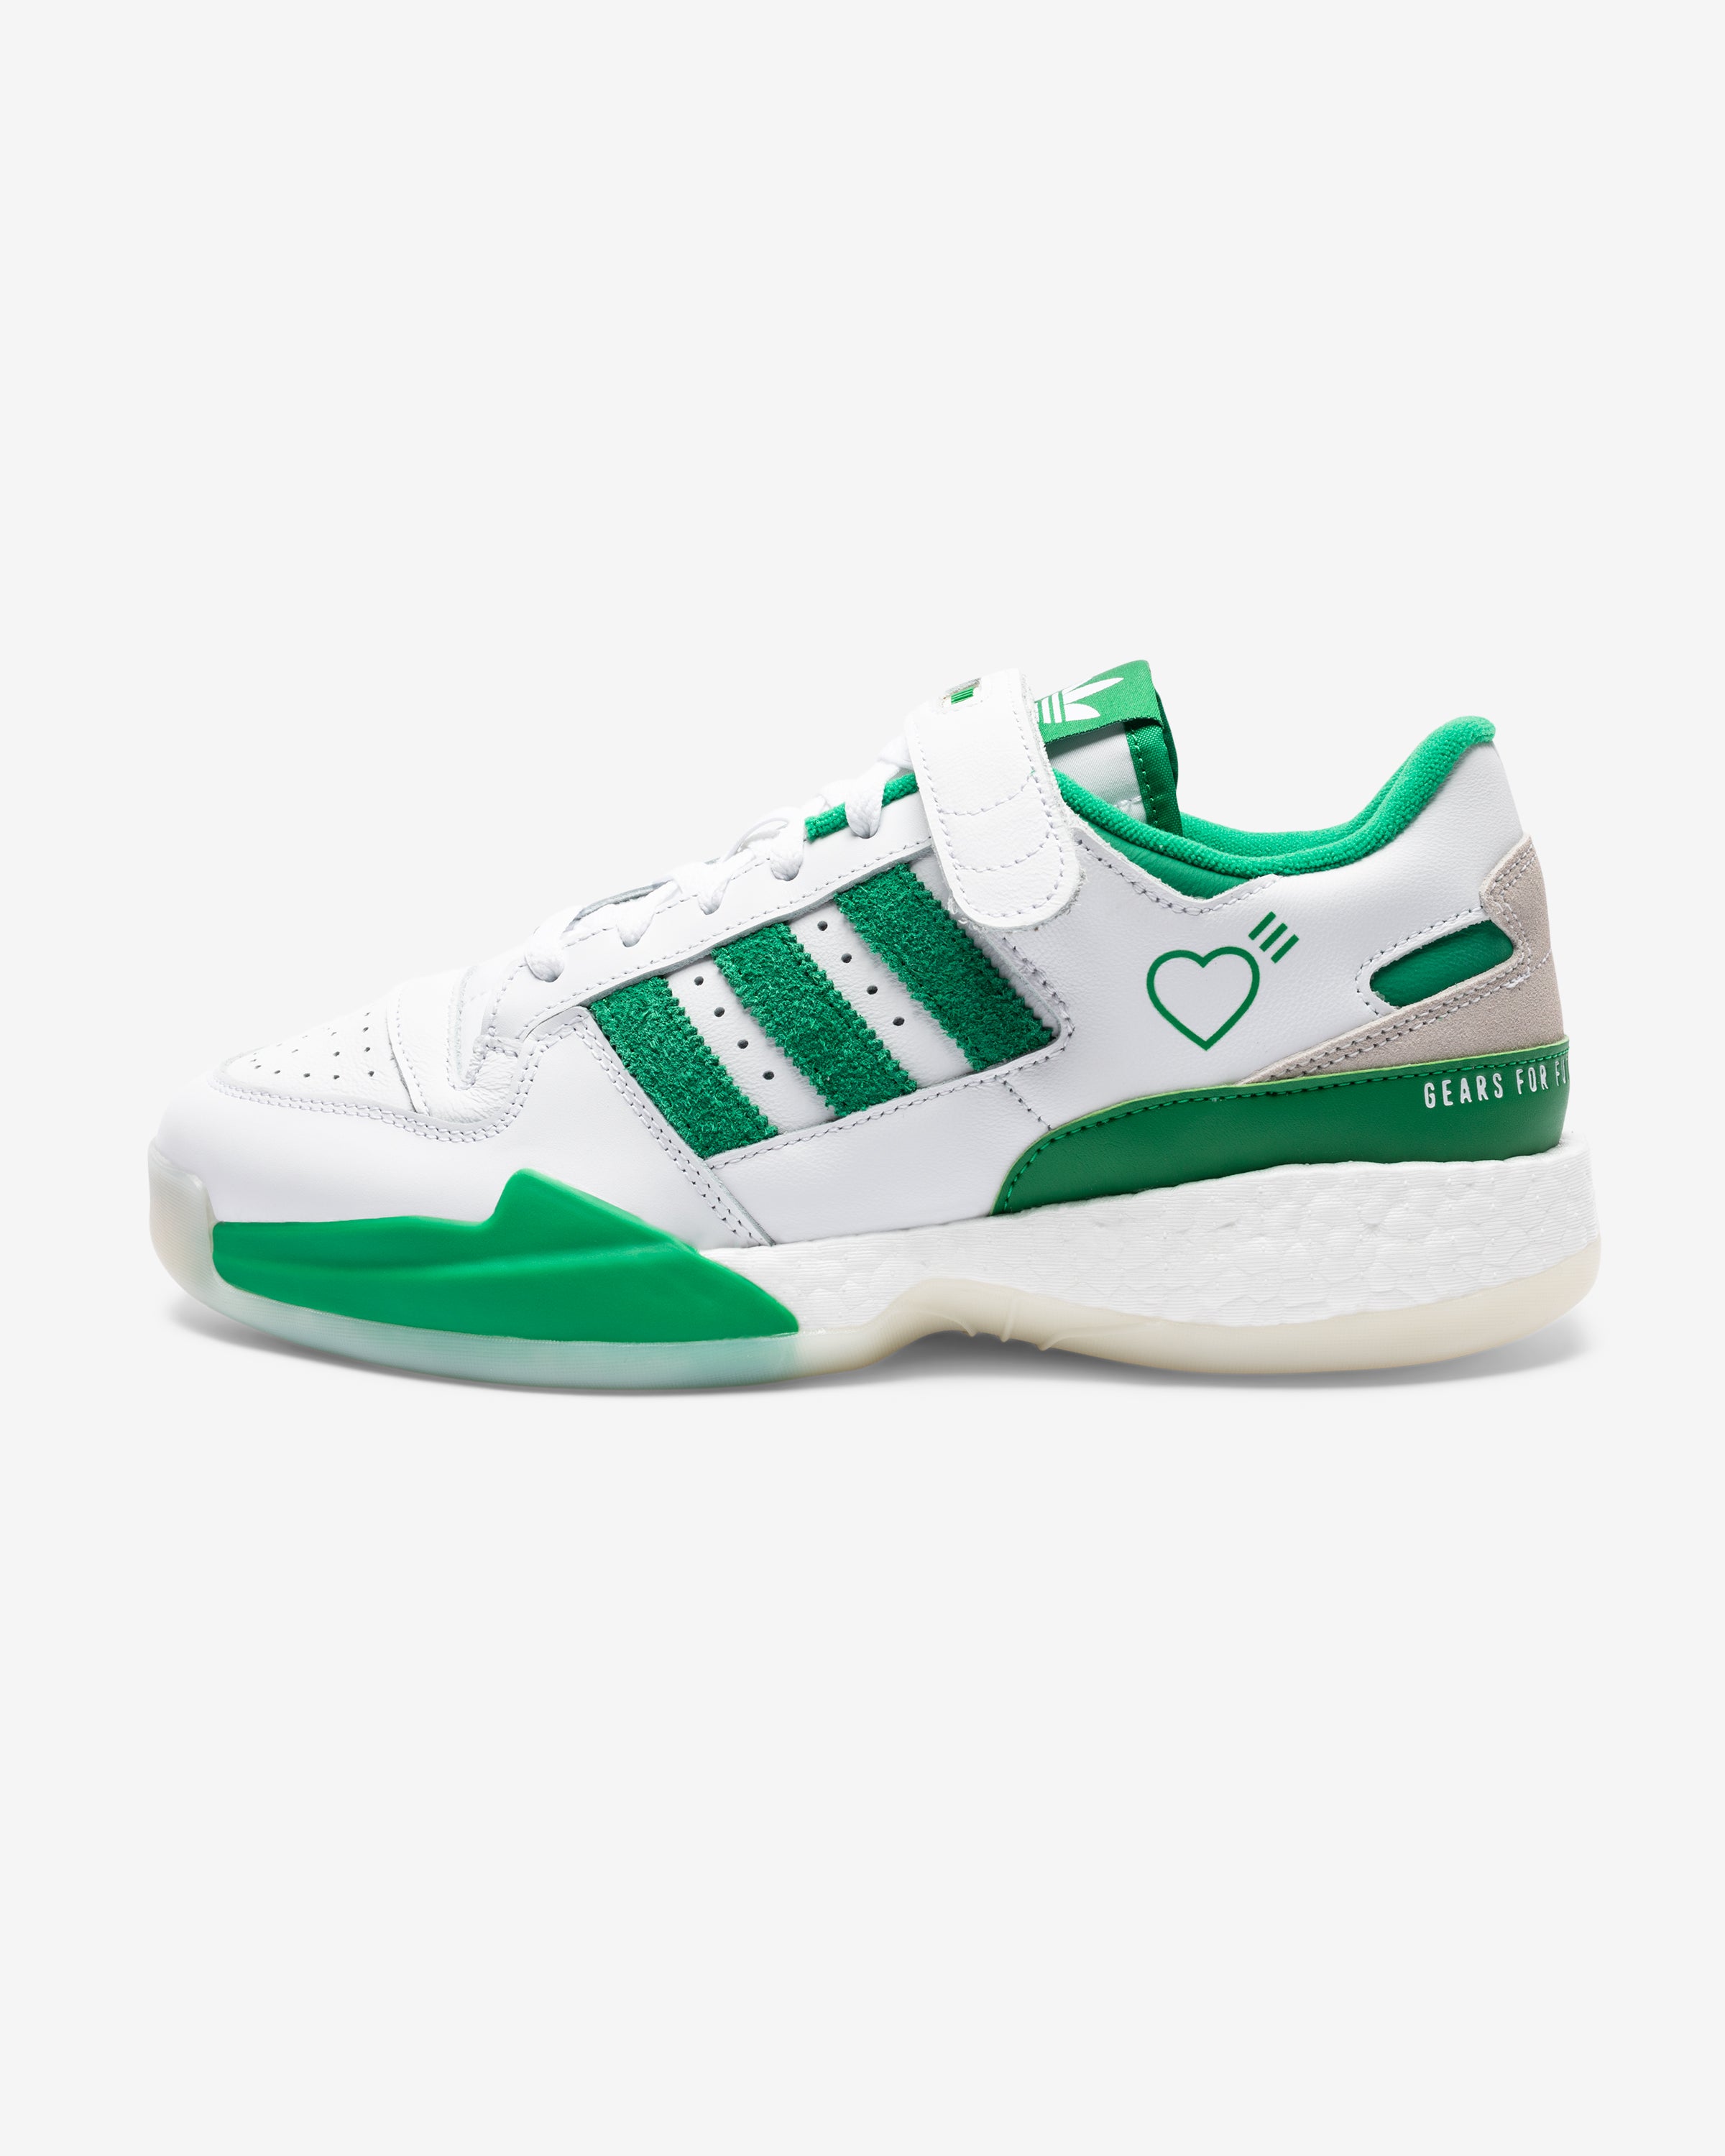 ADIDAS X HUMAN MADE FORUM LOW - GREEN – Undefeated